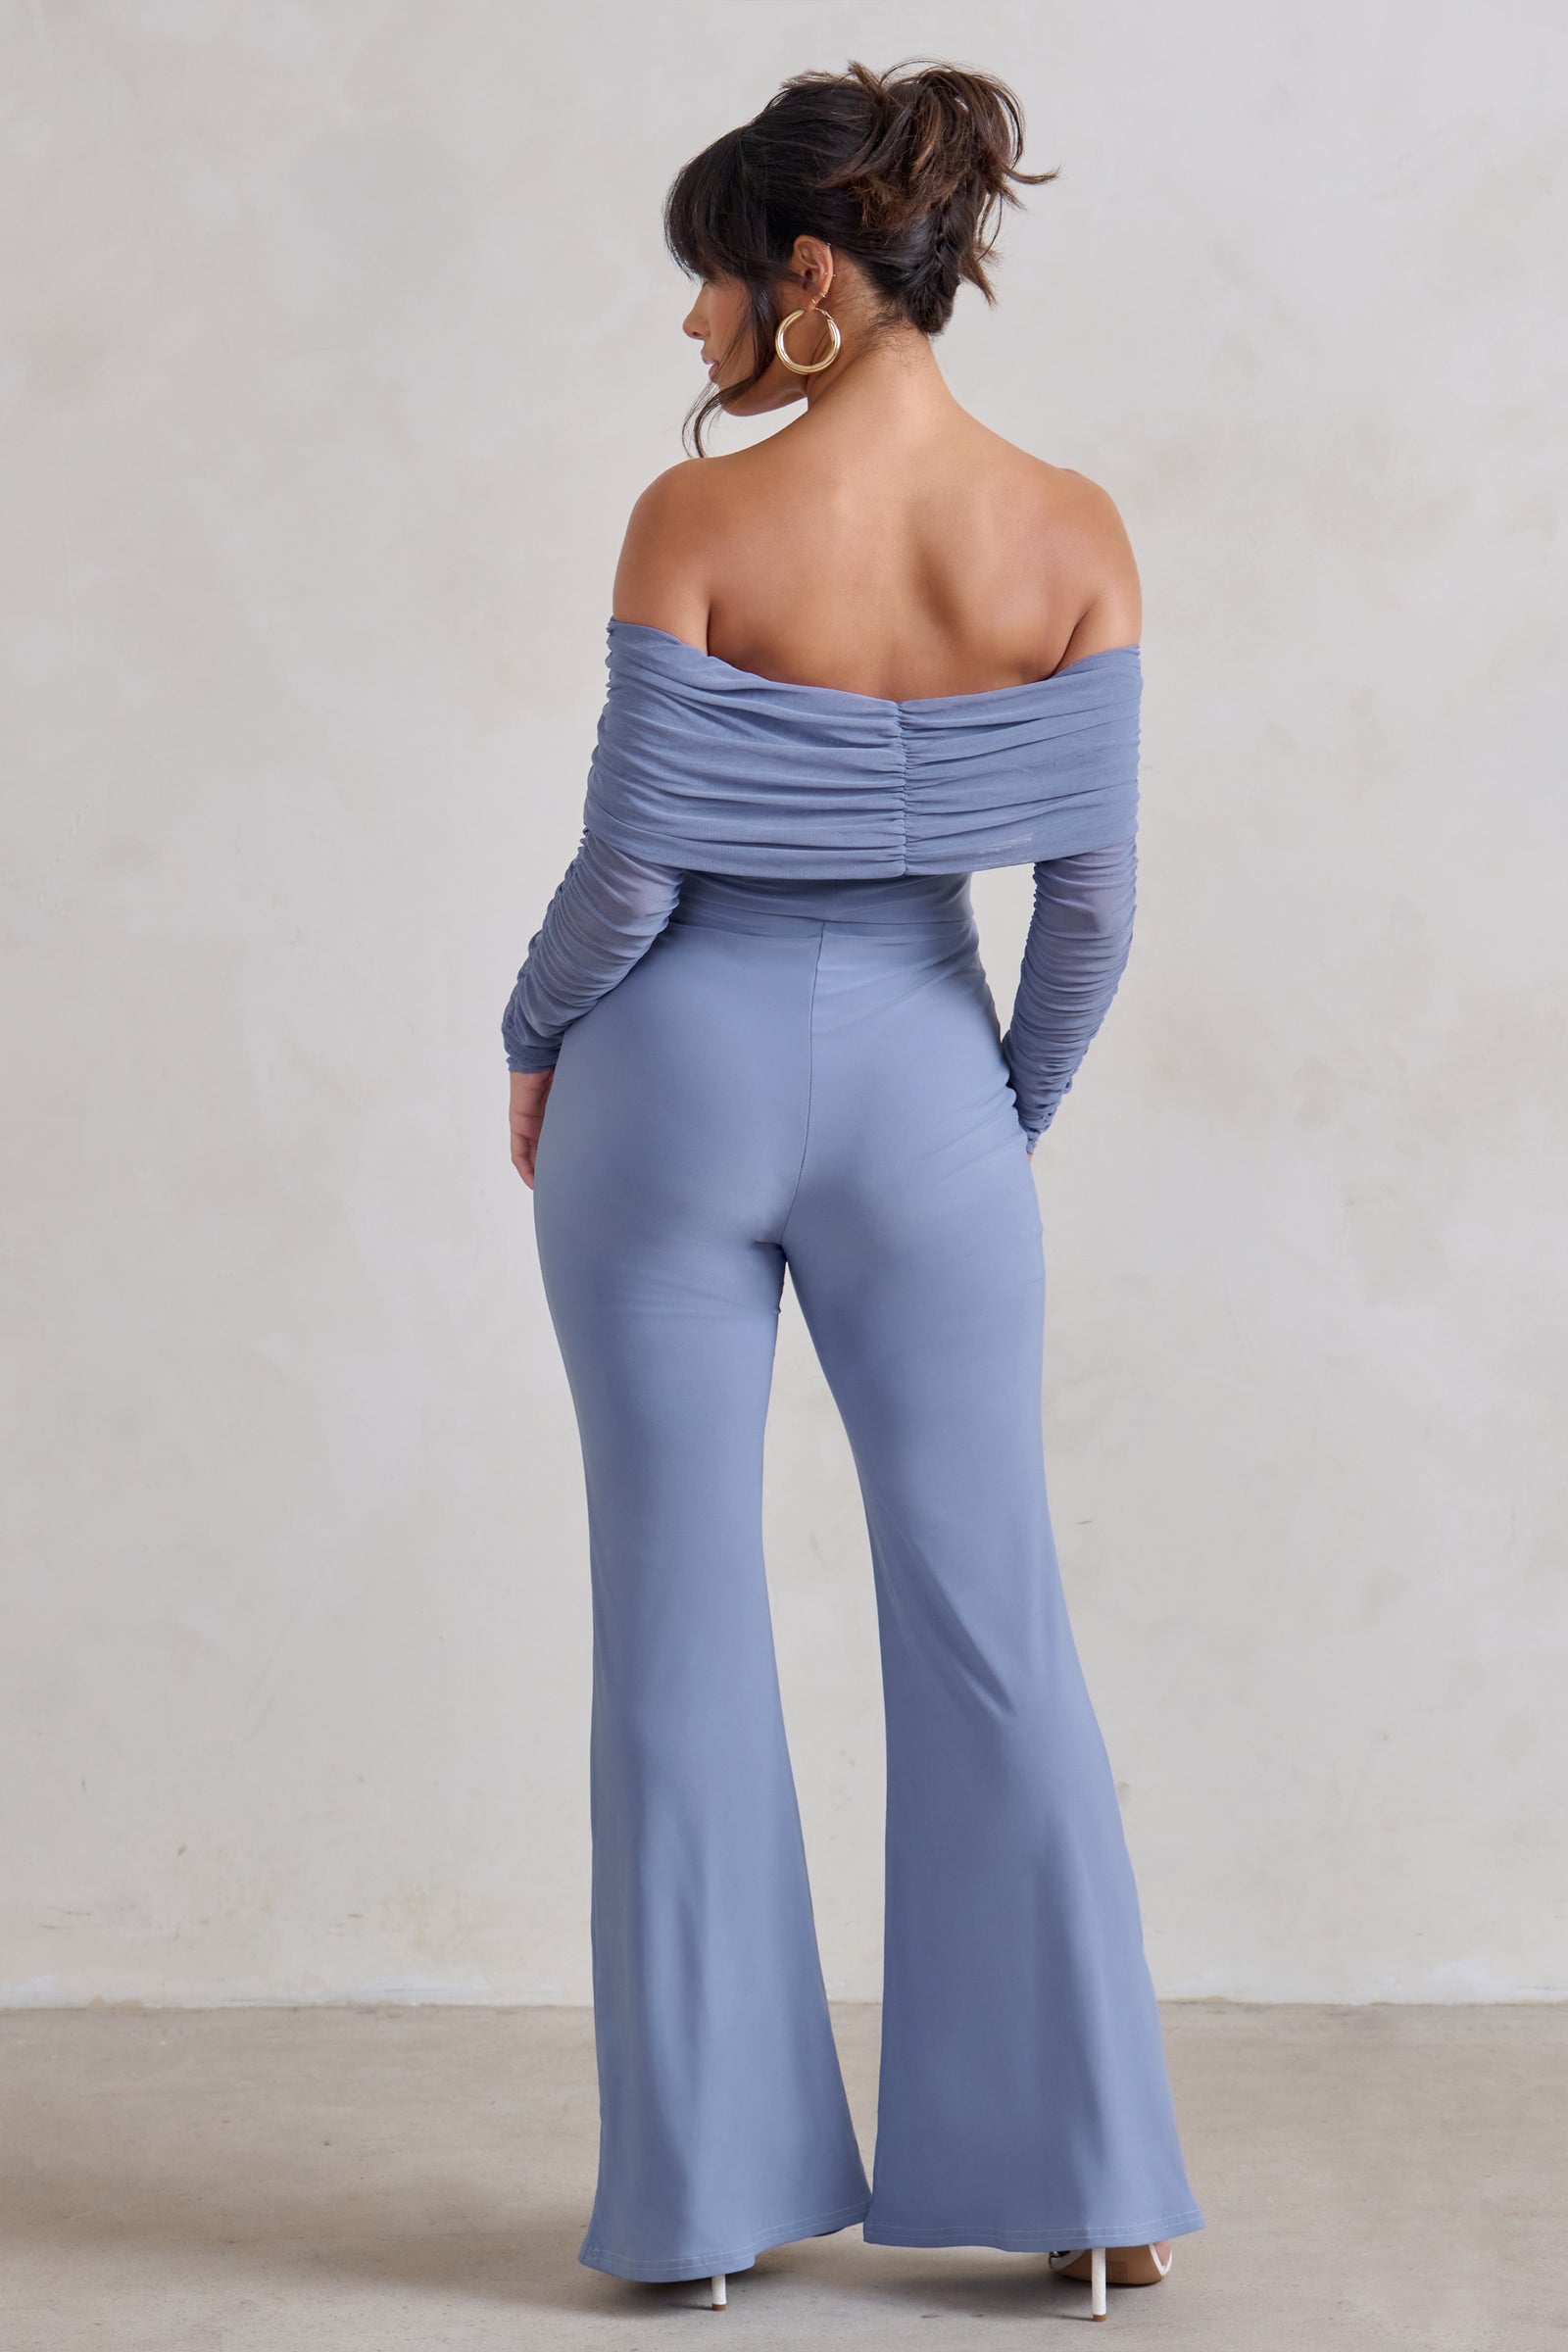 Maddie White Backless Halter Neck Ruched Jumpsuit – Club L London - UK